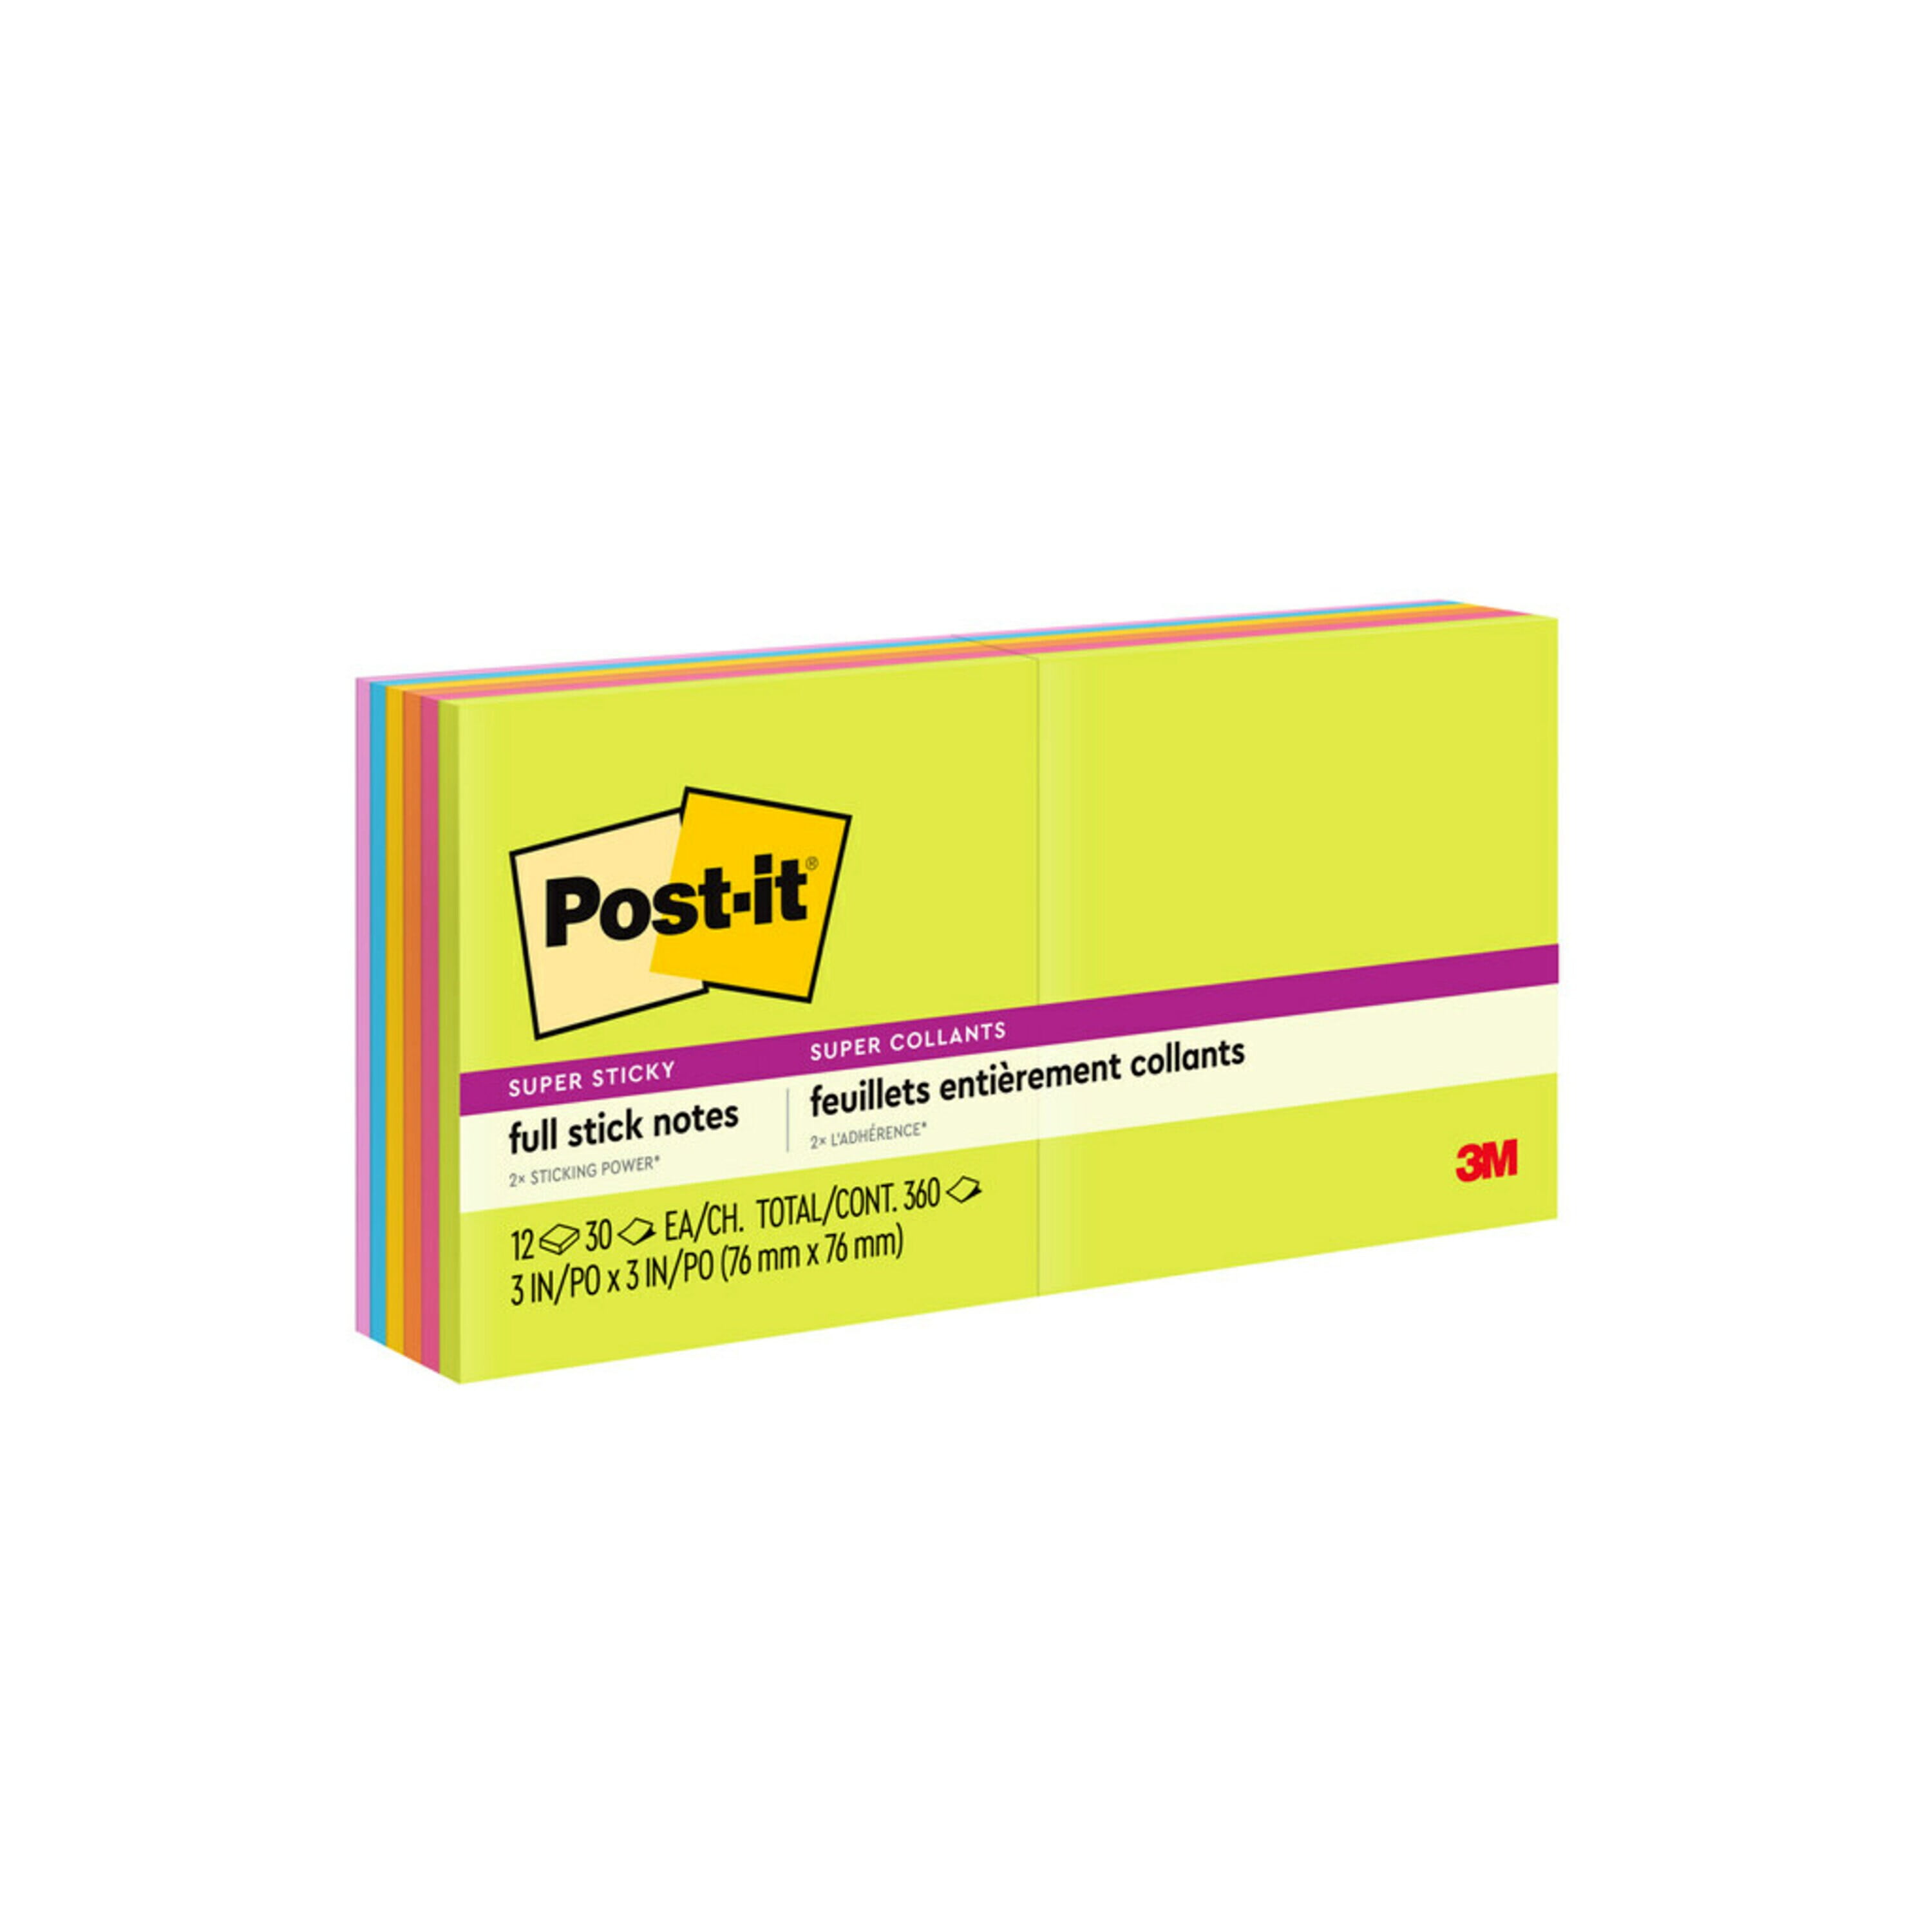 Post-it Super Sticky Full Stick Notes, 3 in. x 3 in., Energy 12 Pads - Walmart.com